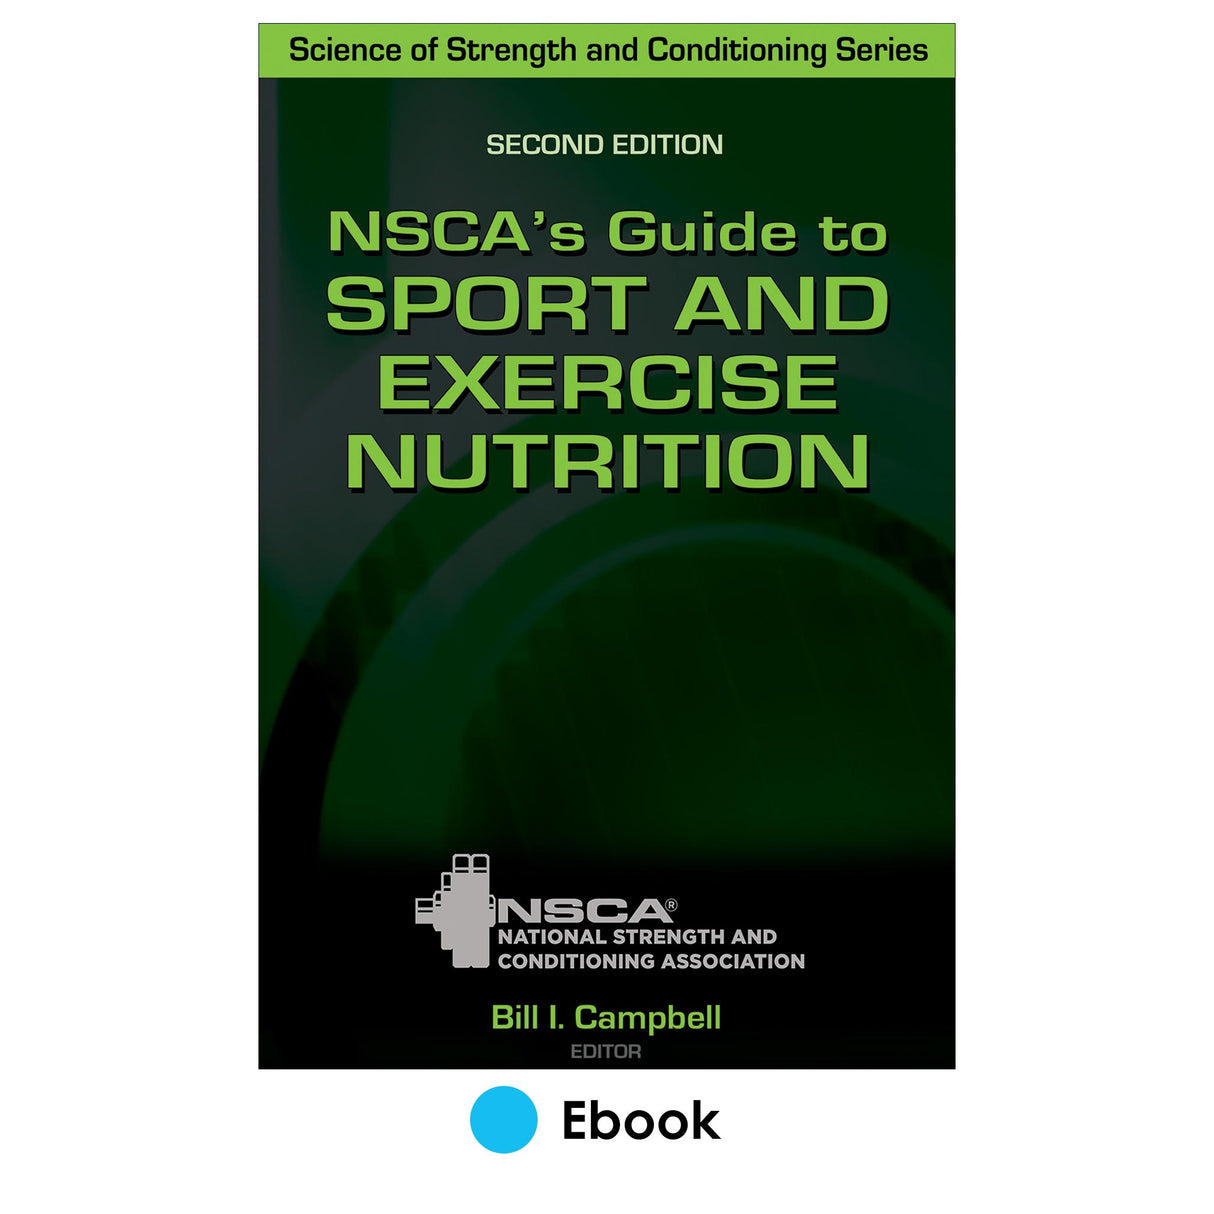 NSCA's Guide to Sport and Exercise Nutrition 2nd Edition epub